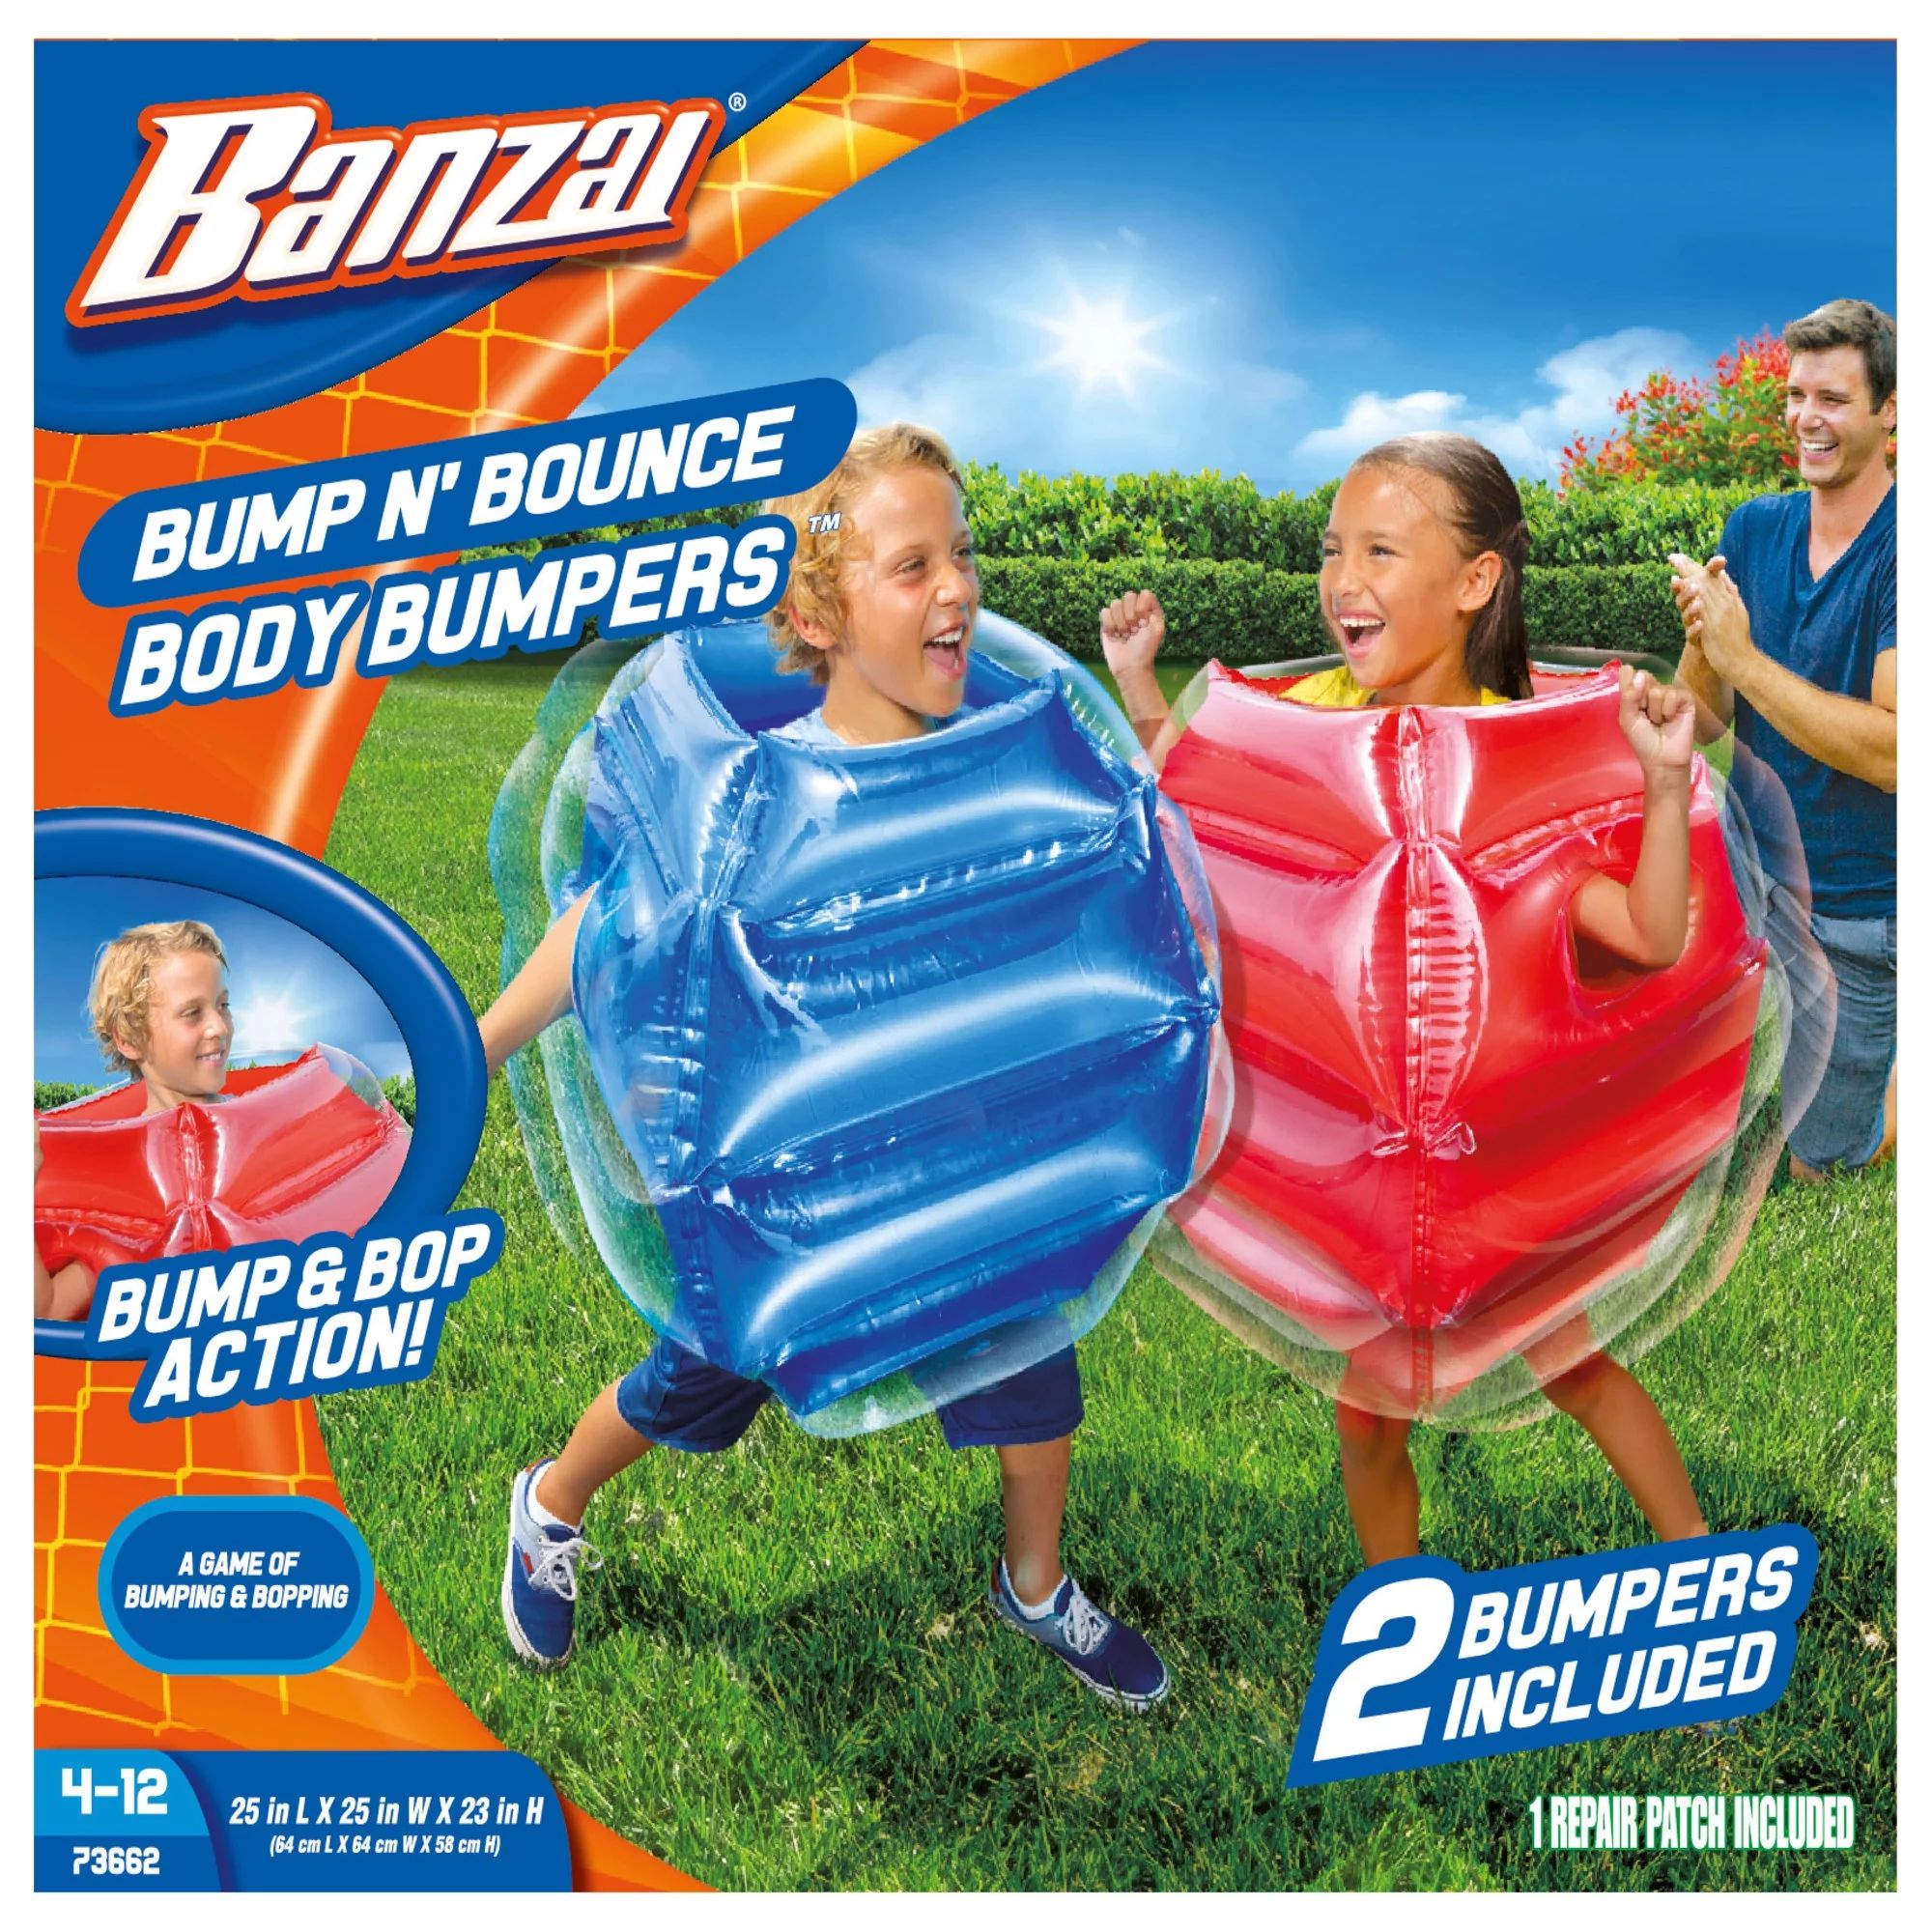 Banzai Bump N Bounce Plastic Body Bumpers in Red & Blue, 2 Bumpers, Kids Toy, 4+ | Walmart (US)